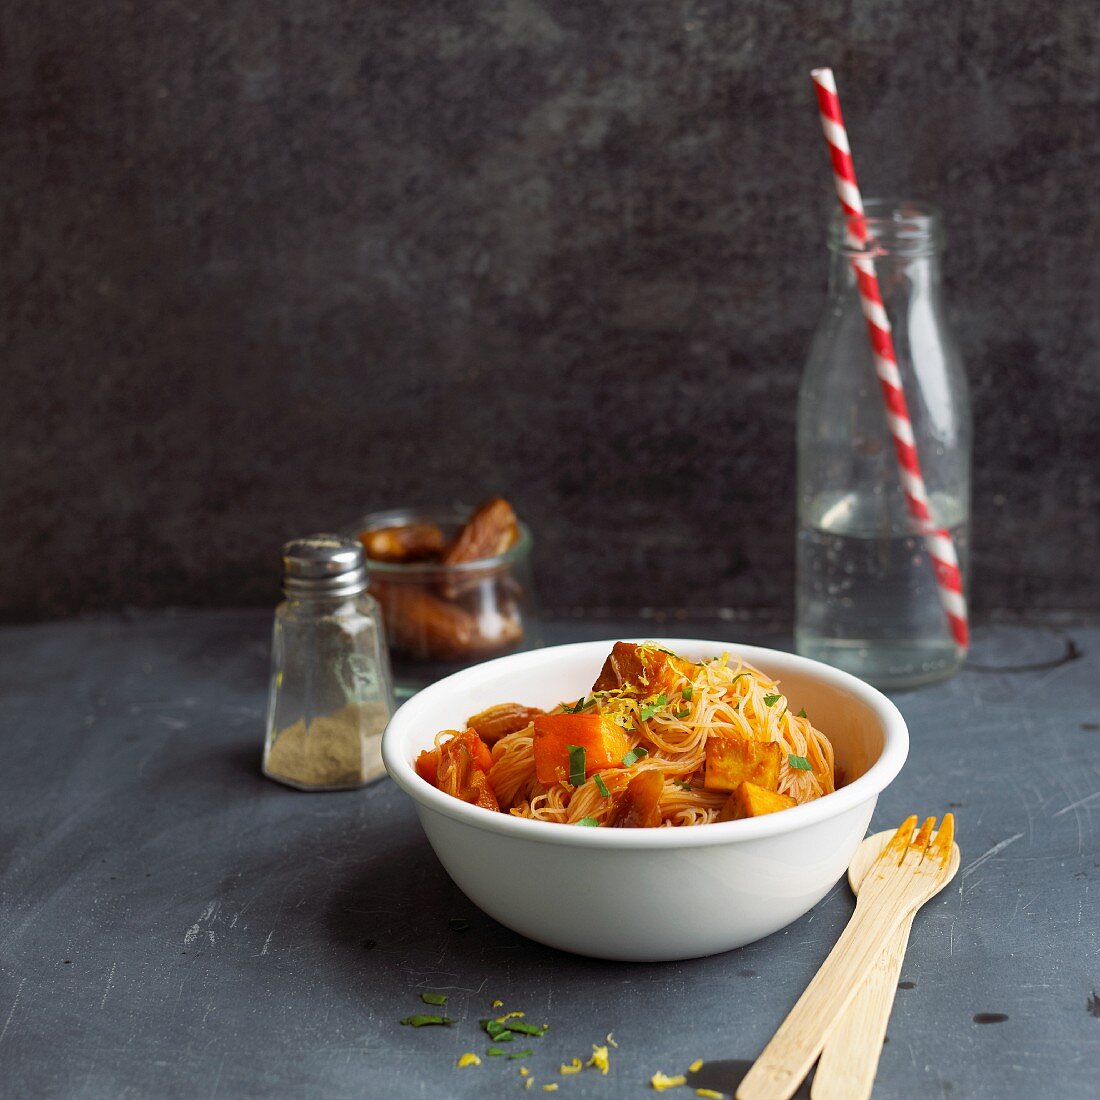 Roasted pumpkin with dates and rice noodles